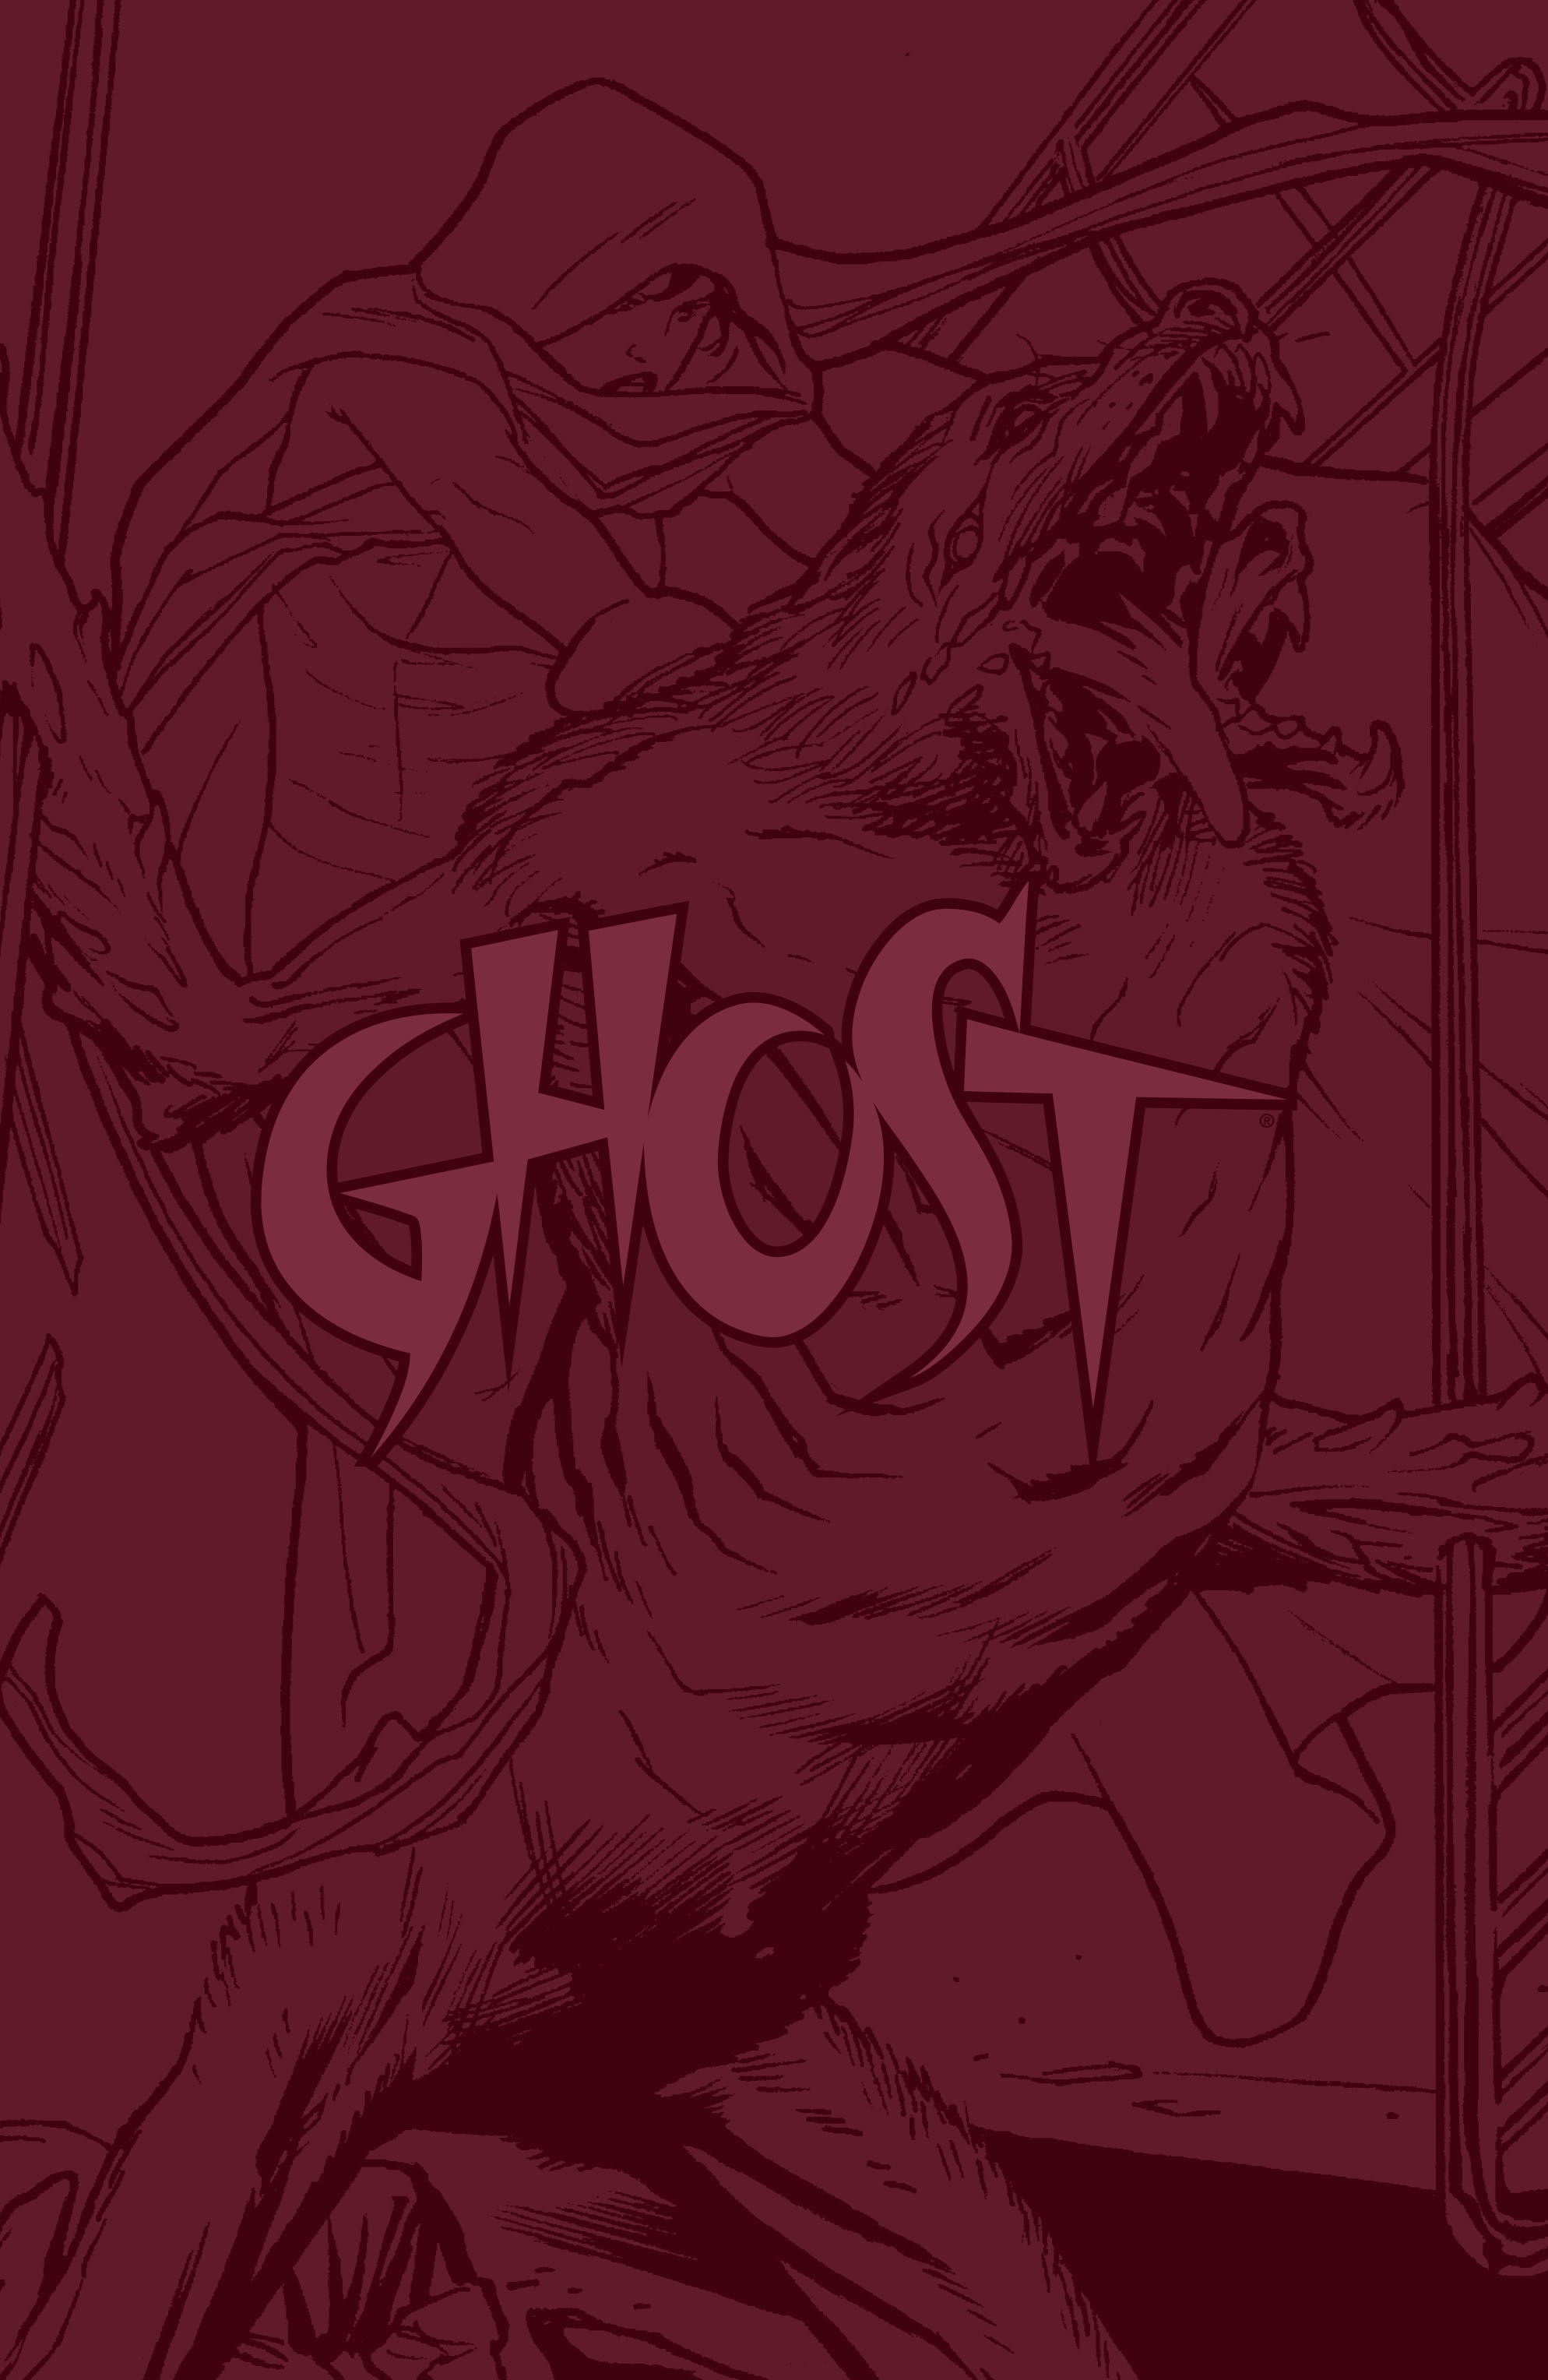 Read online Ghost (2013) comic -  Issue # TPB 1 - 7